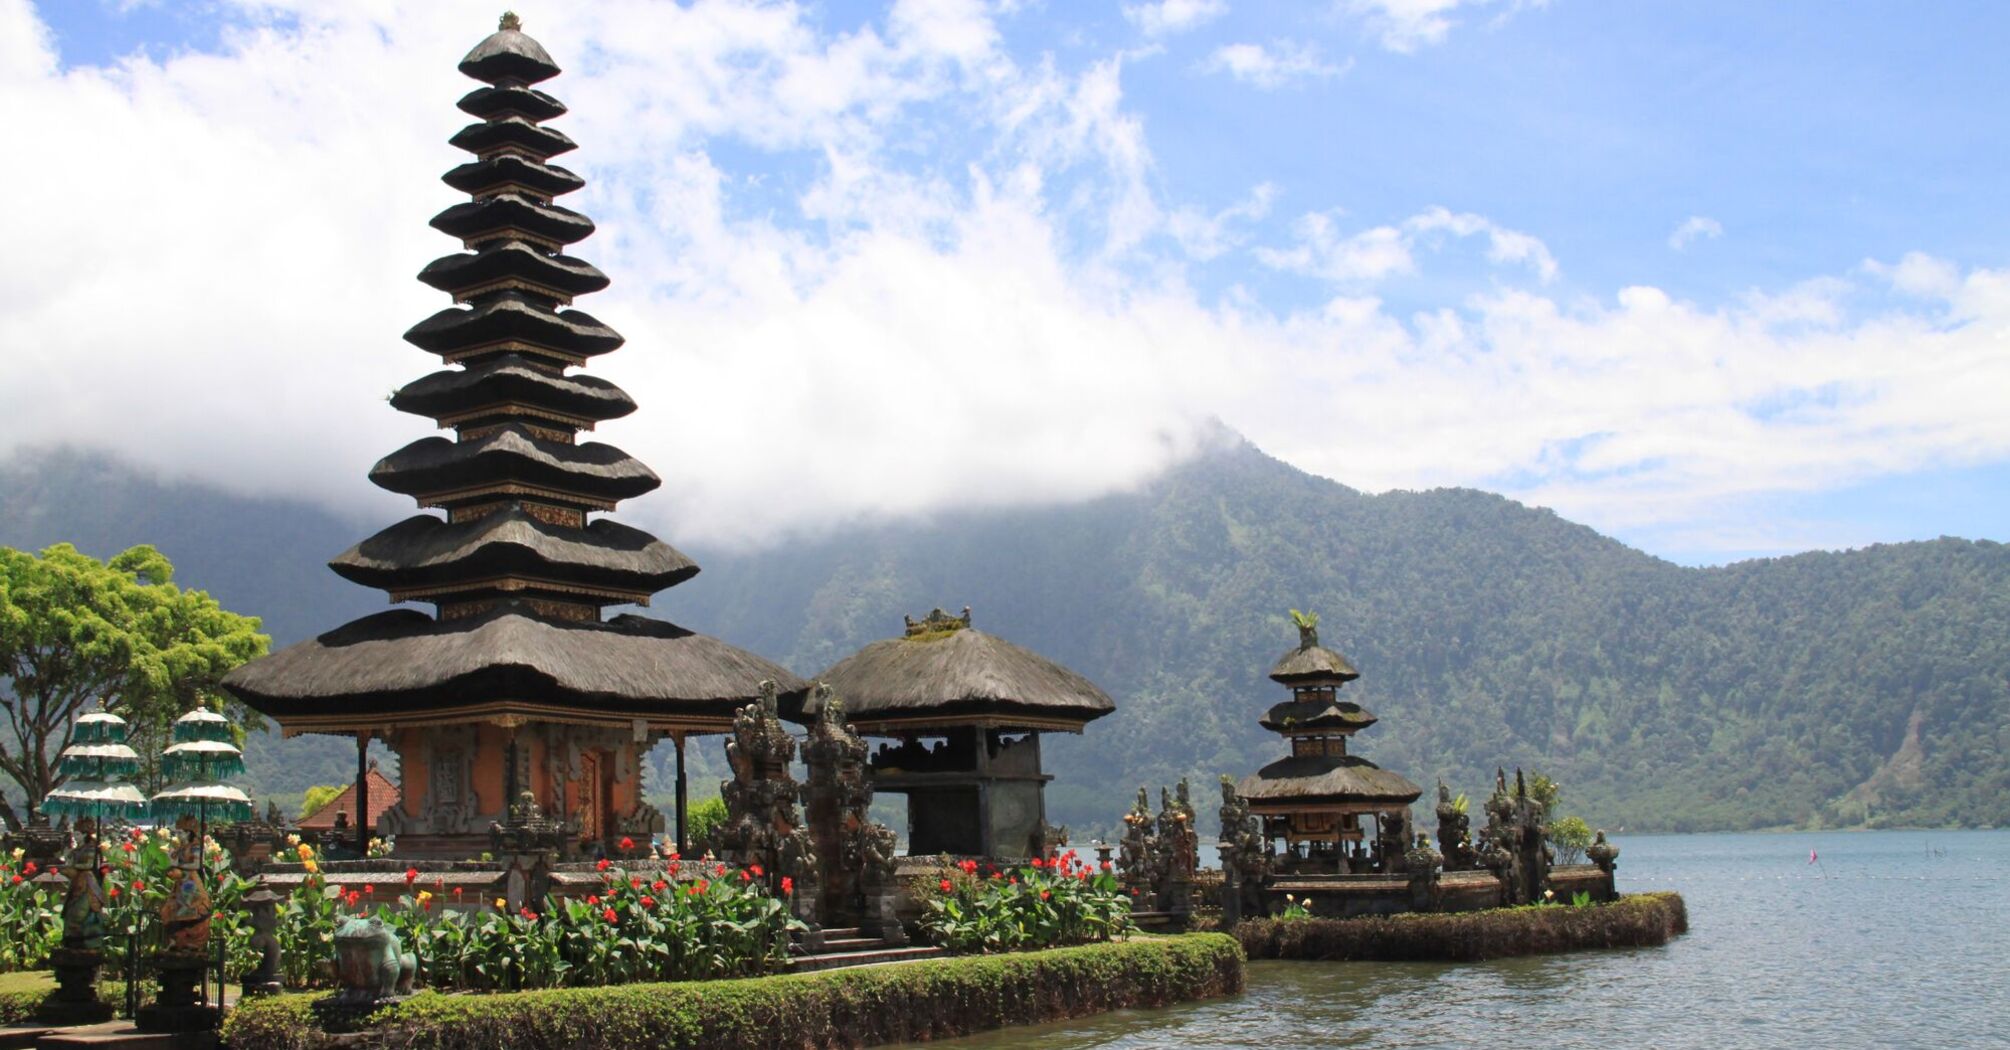 Tourist places in Indonesia worth visiting this March